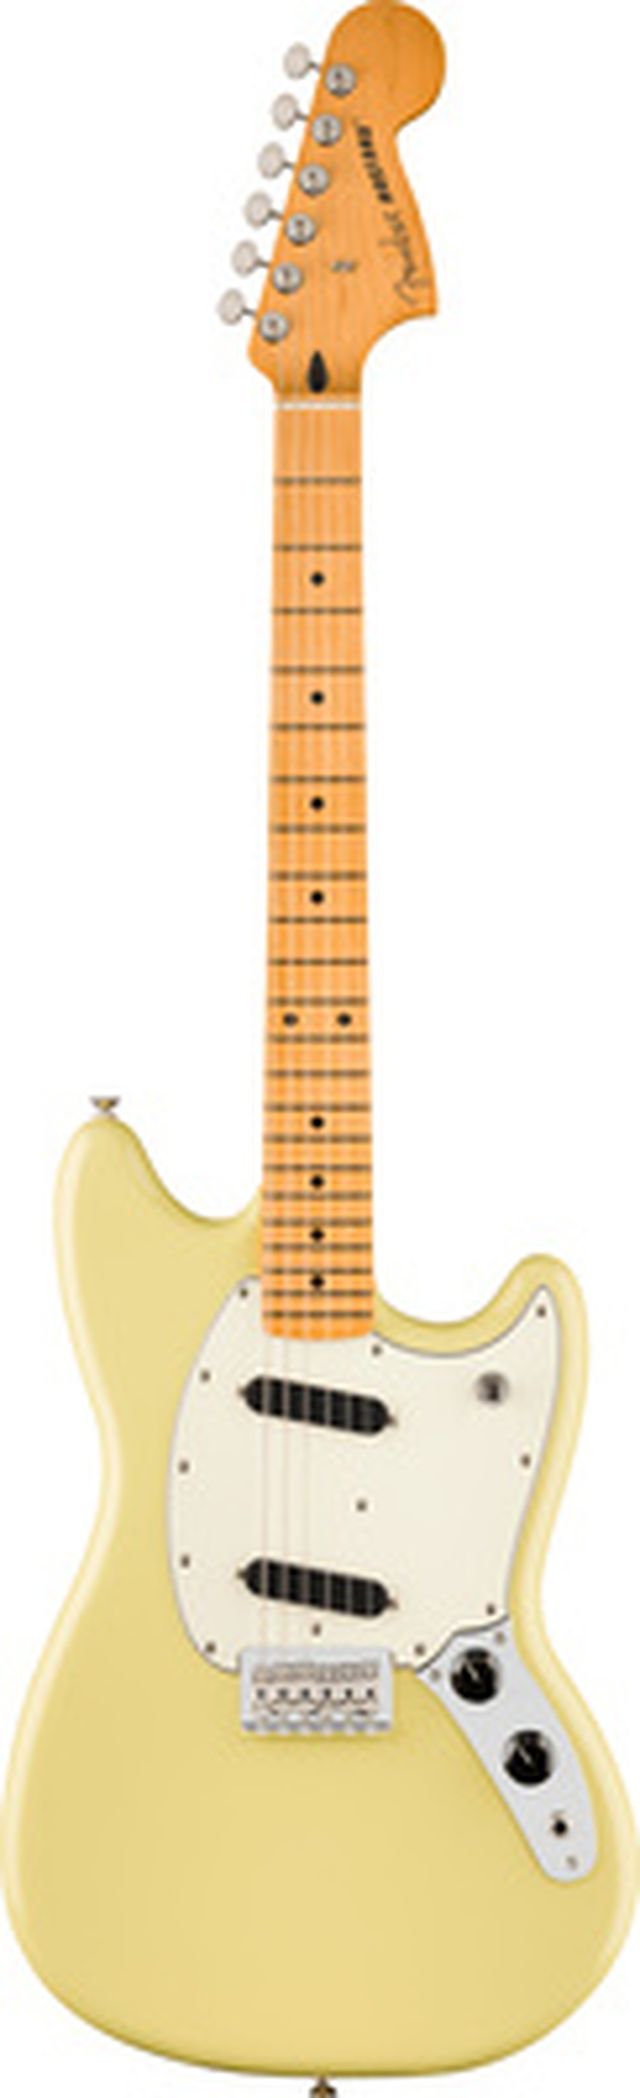 Fender Player II Mustang MN HLY